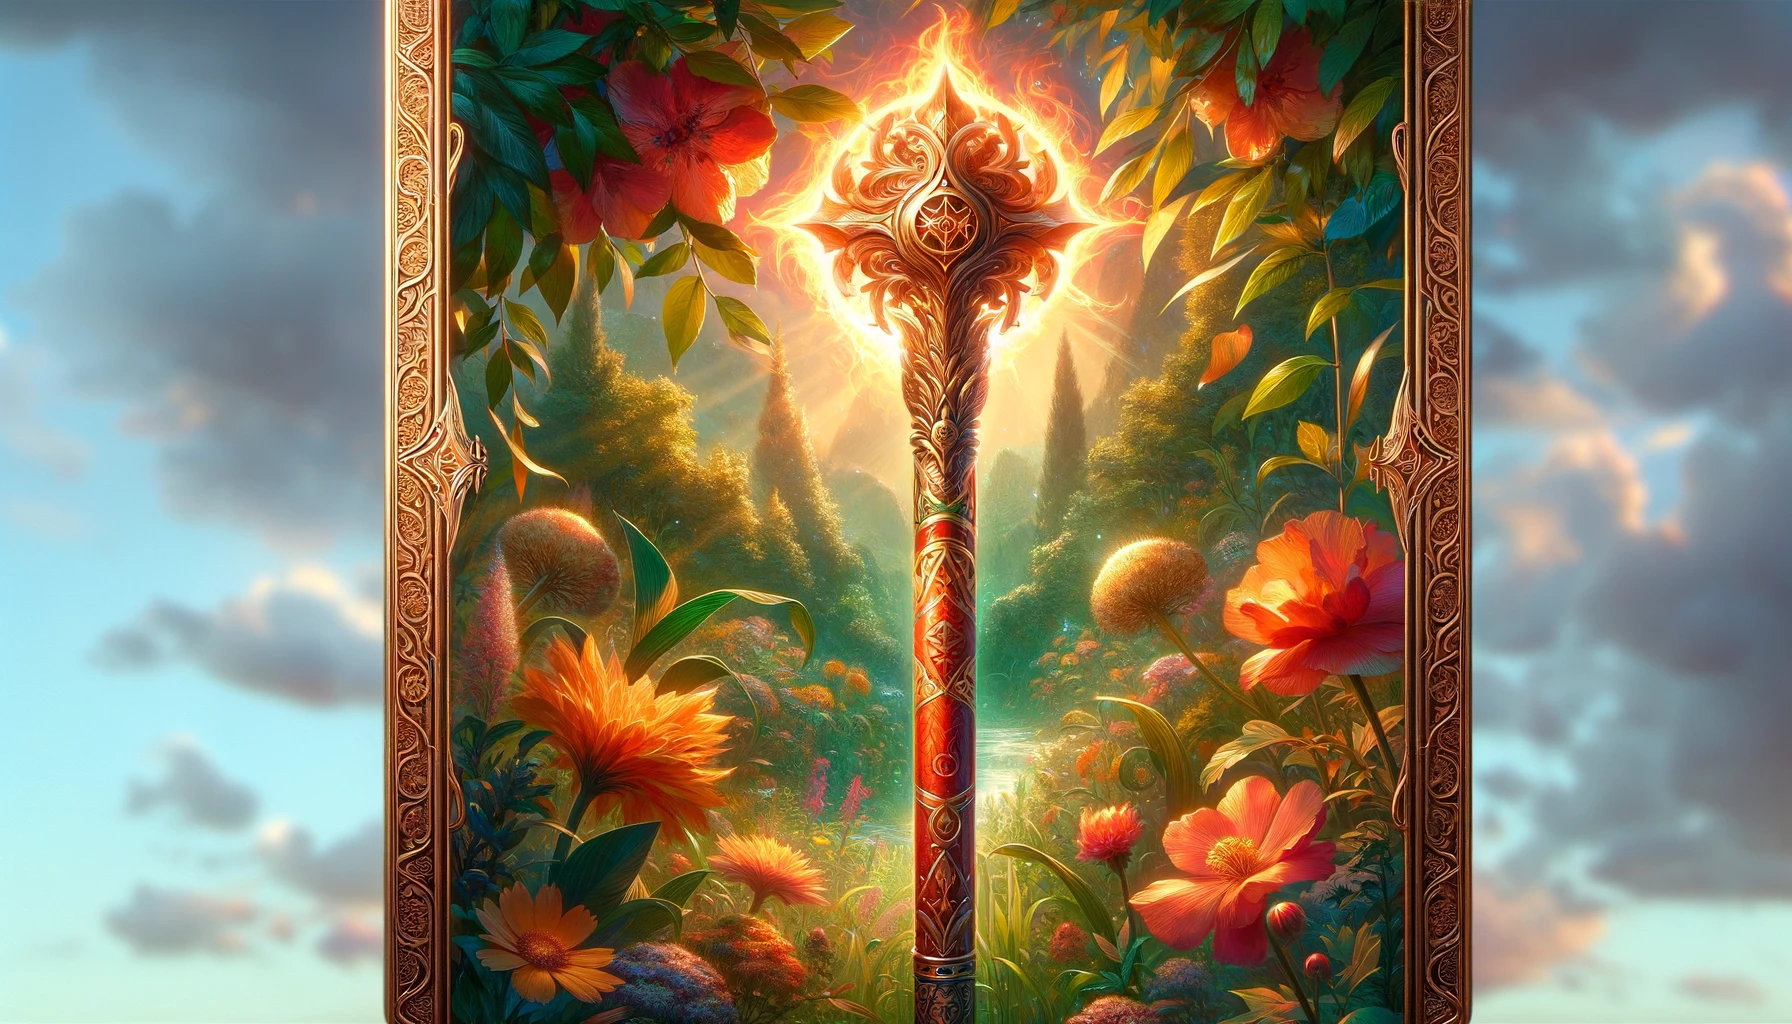 An image showcasing the Ace of Wands tarot card A vibrant fiery wand adorned with intricate carvings surrounded by a rich landscape of lush greenery and blooming flowers The wand emana